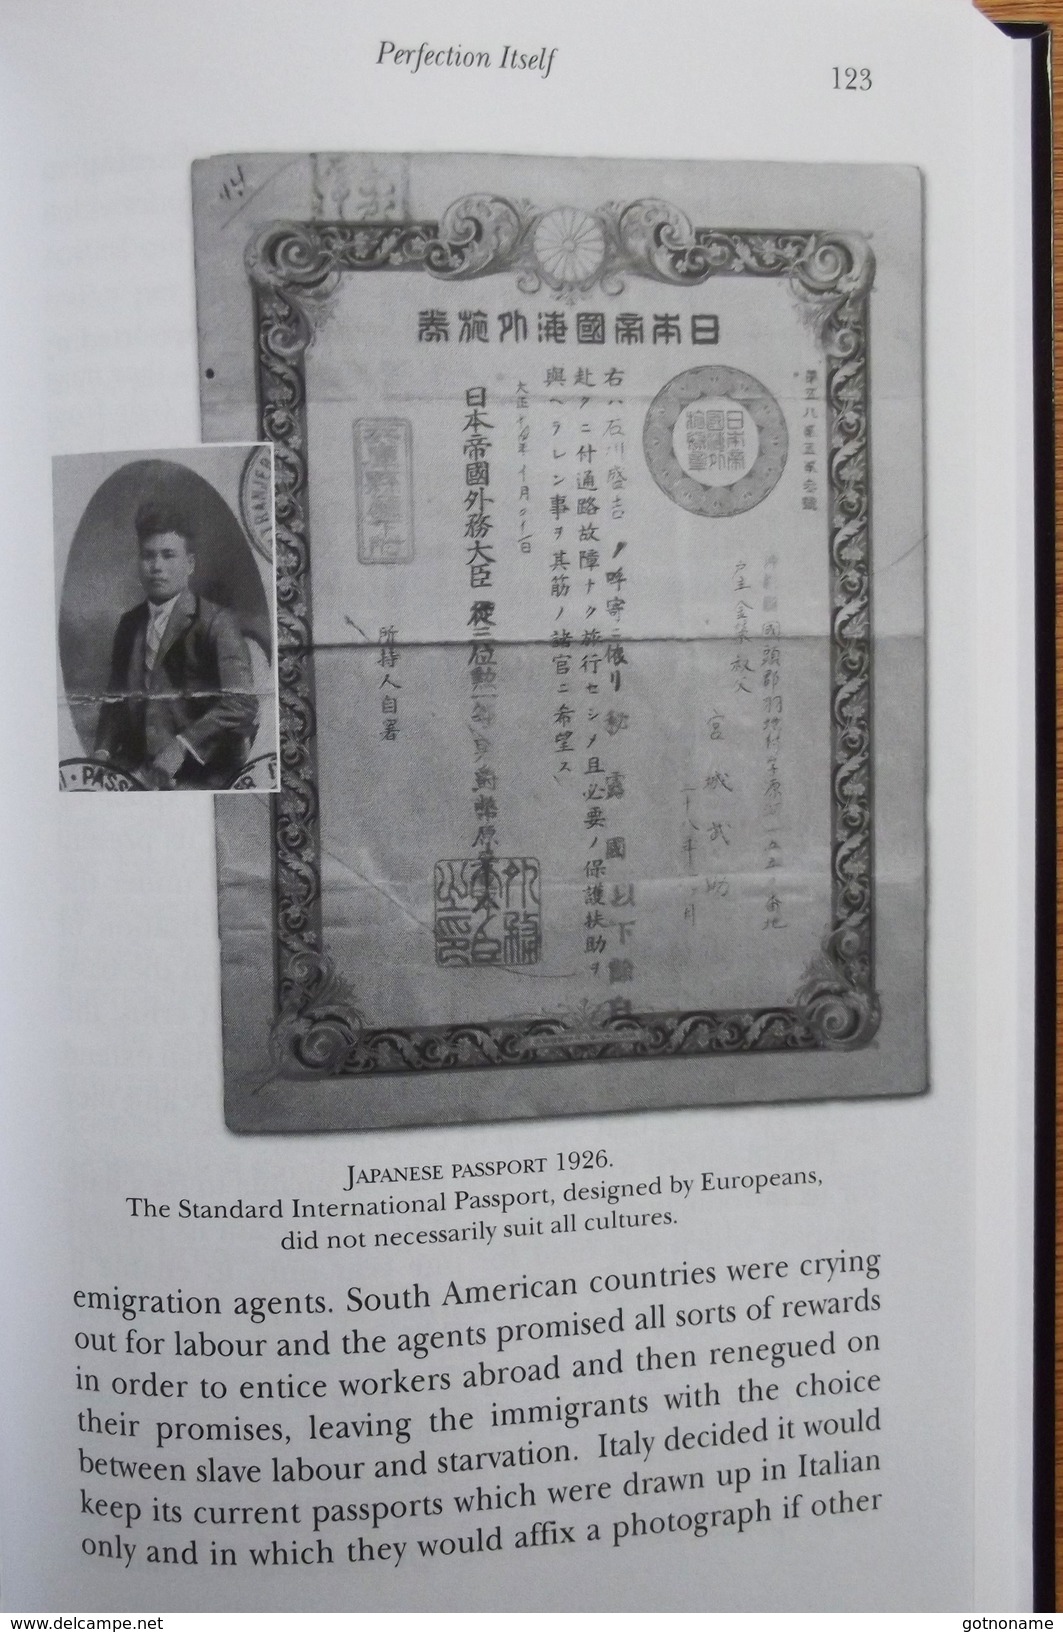 Passeport THE PASSPORT The History of Man's Most Travelled Document, livre texte anglais